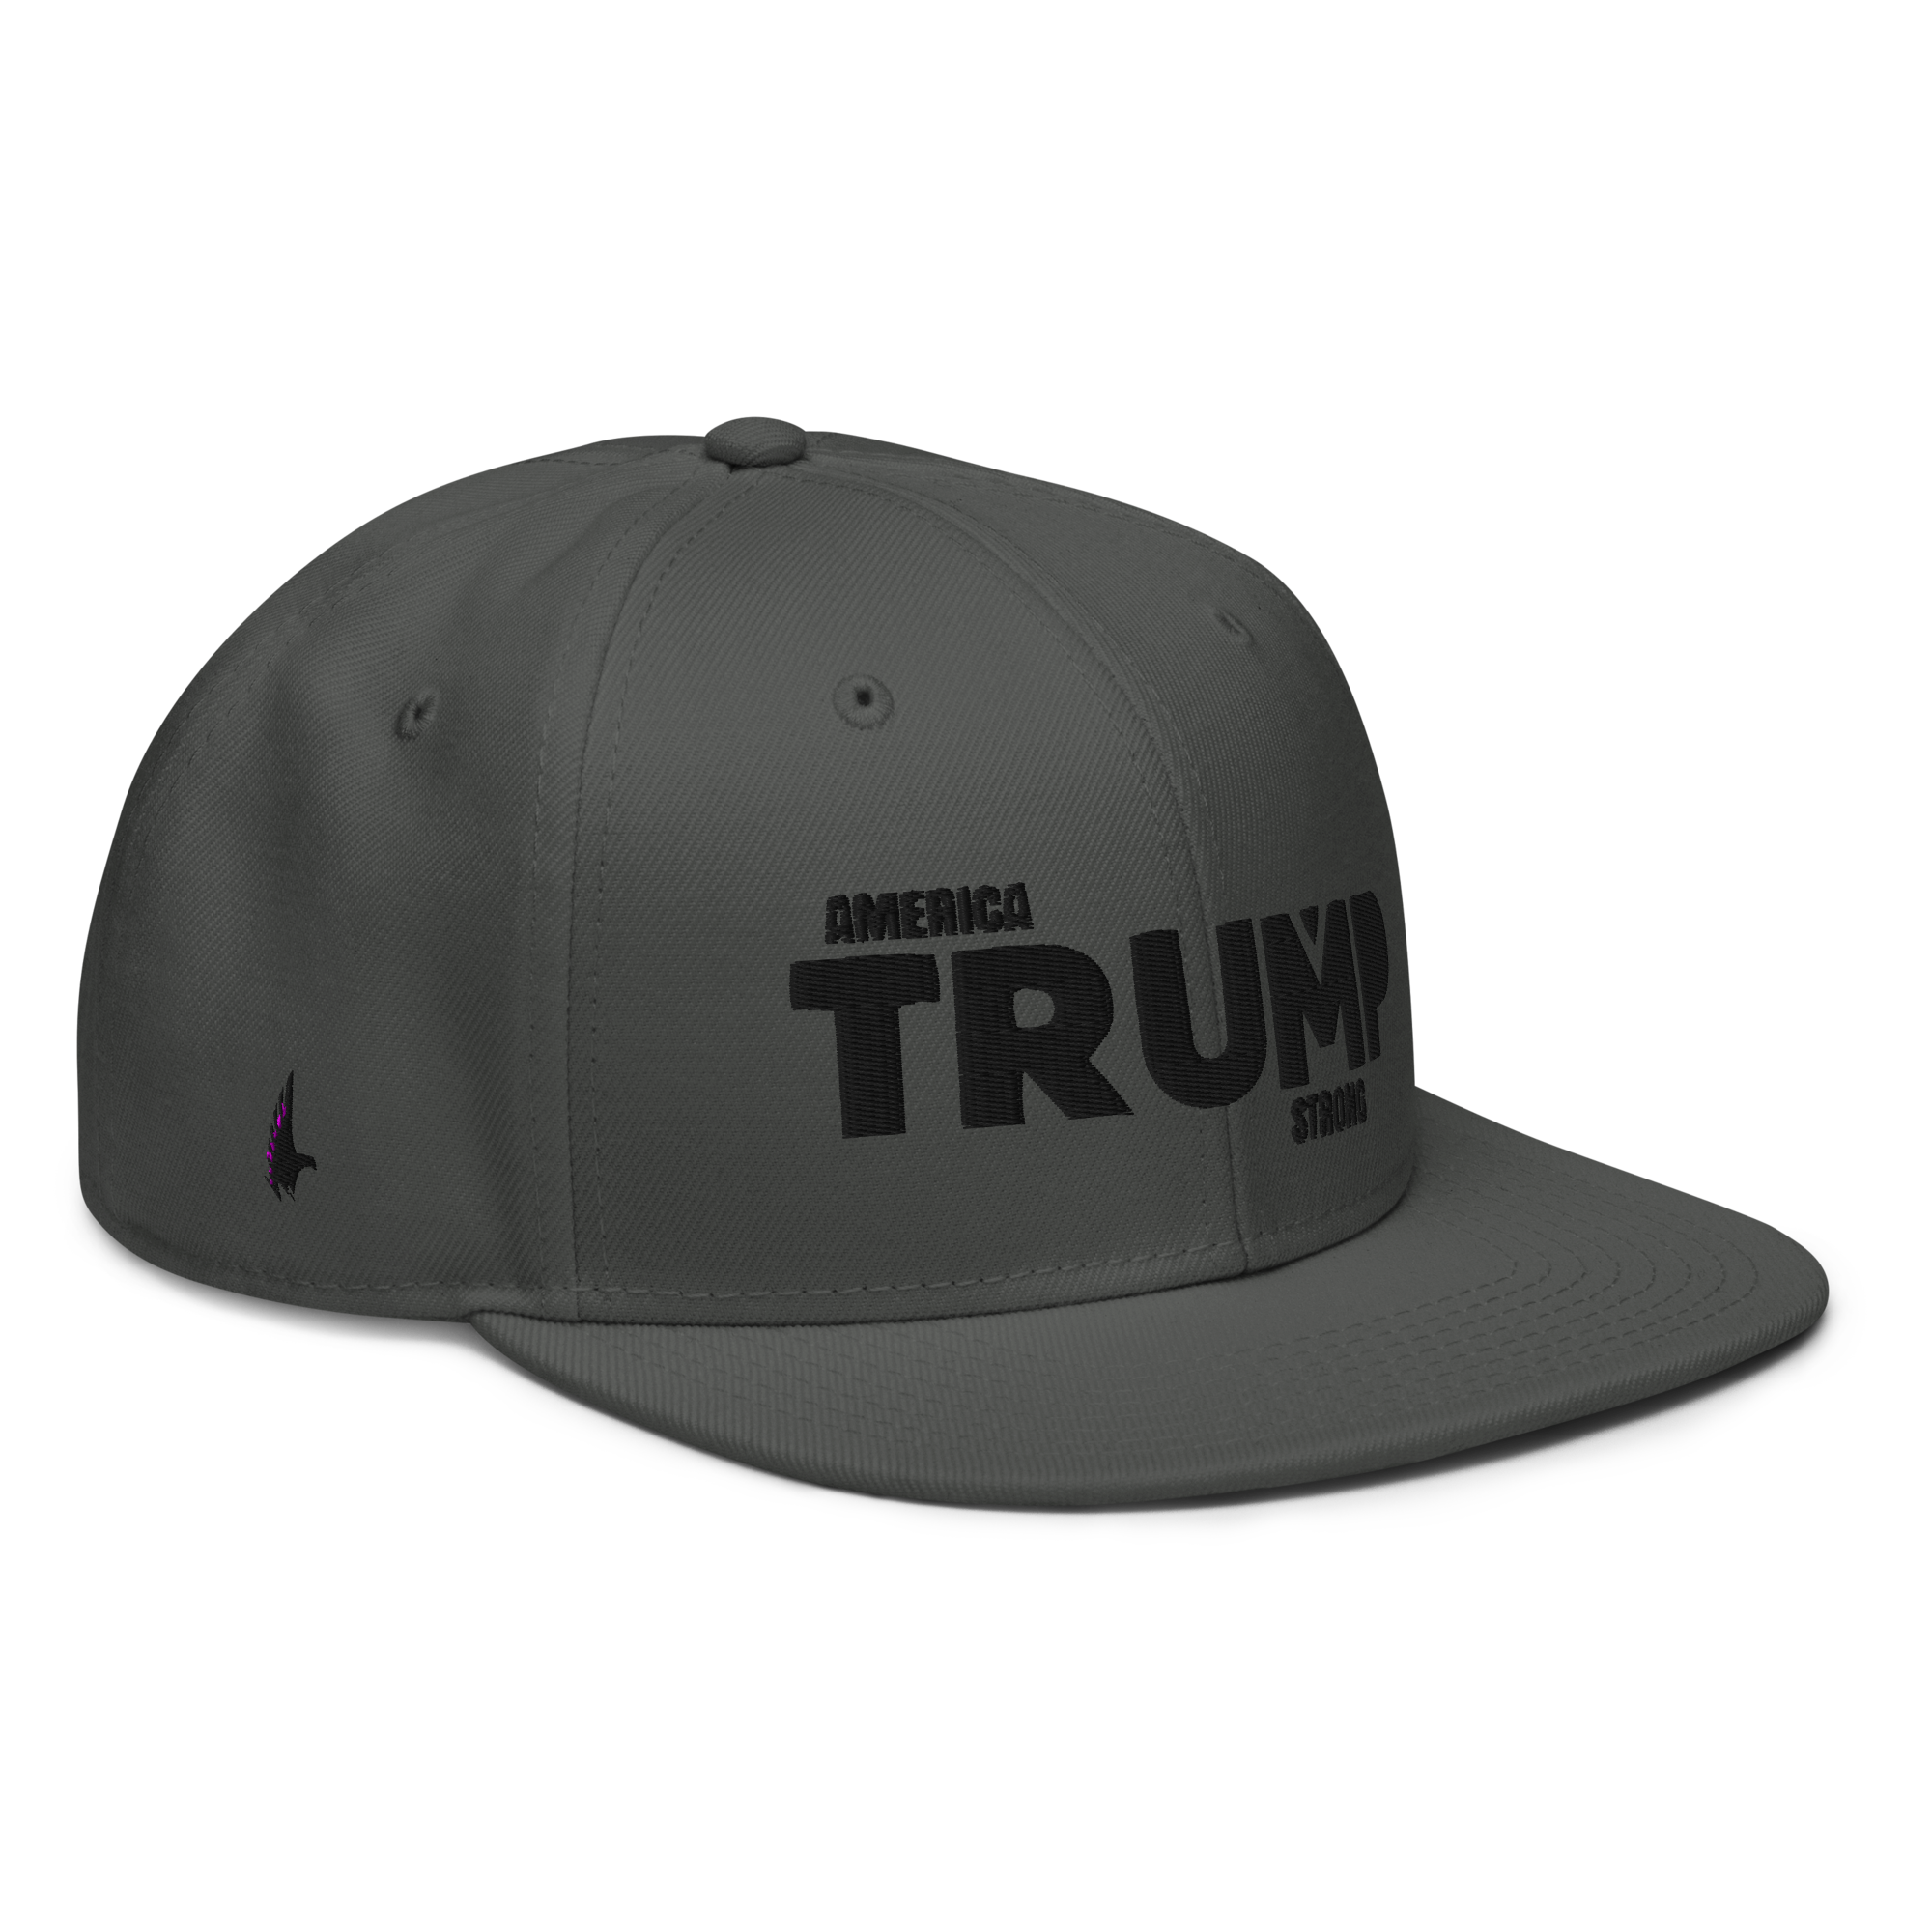 Loyalty Vibes America Trump Strong Snapback Hat Charcoal Grey Black One size - Loyalty Vibes